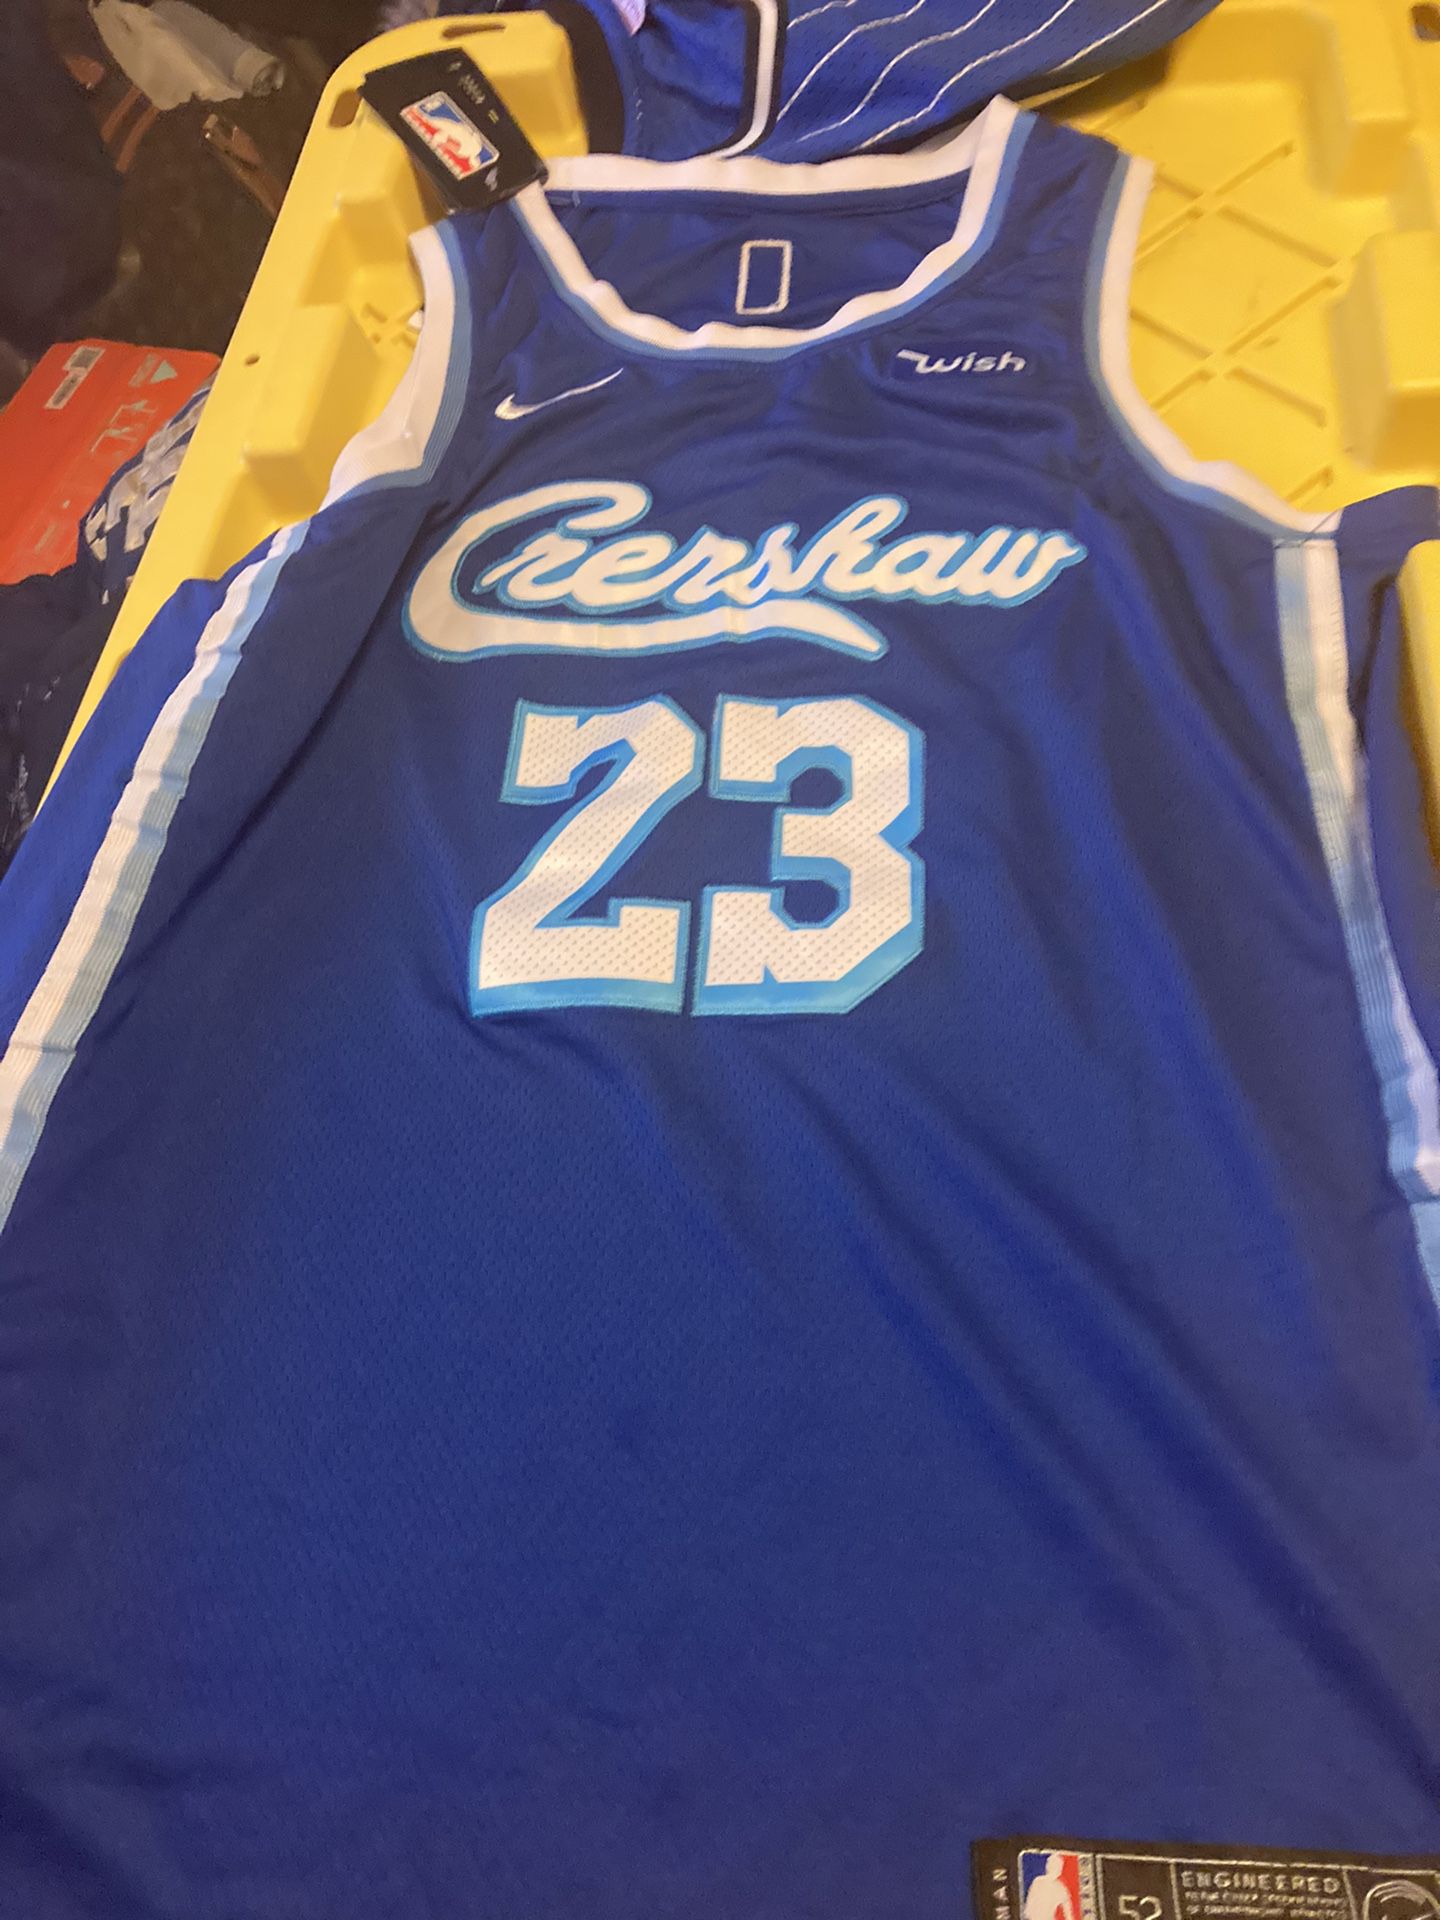 Lebron James Xl Jersey Lakers Crenshaw New for Sale in Denver, CO - OfferUp